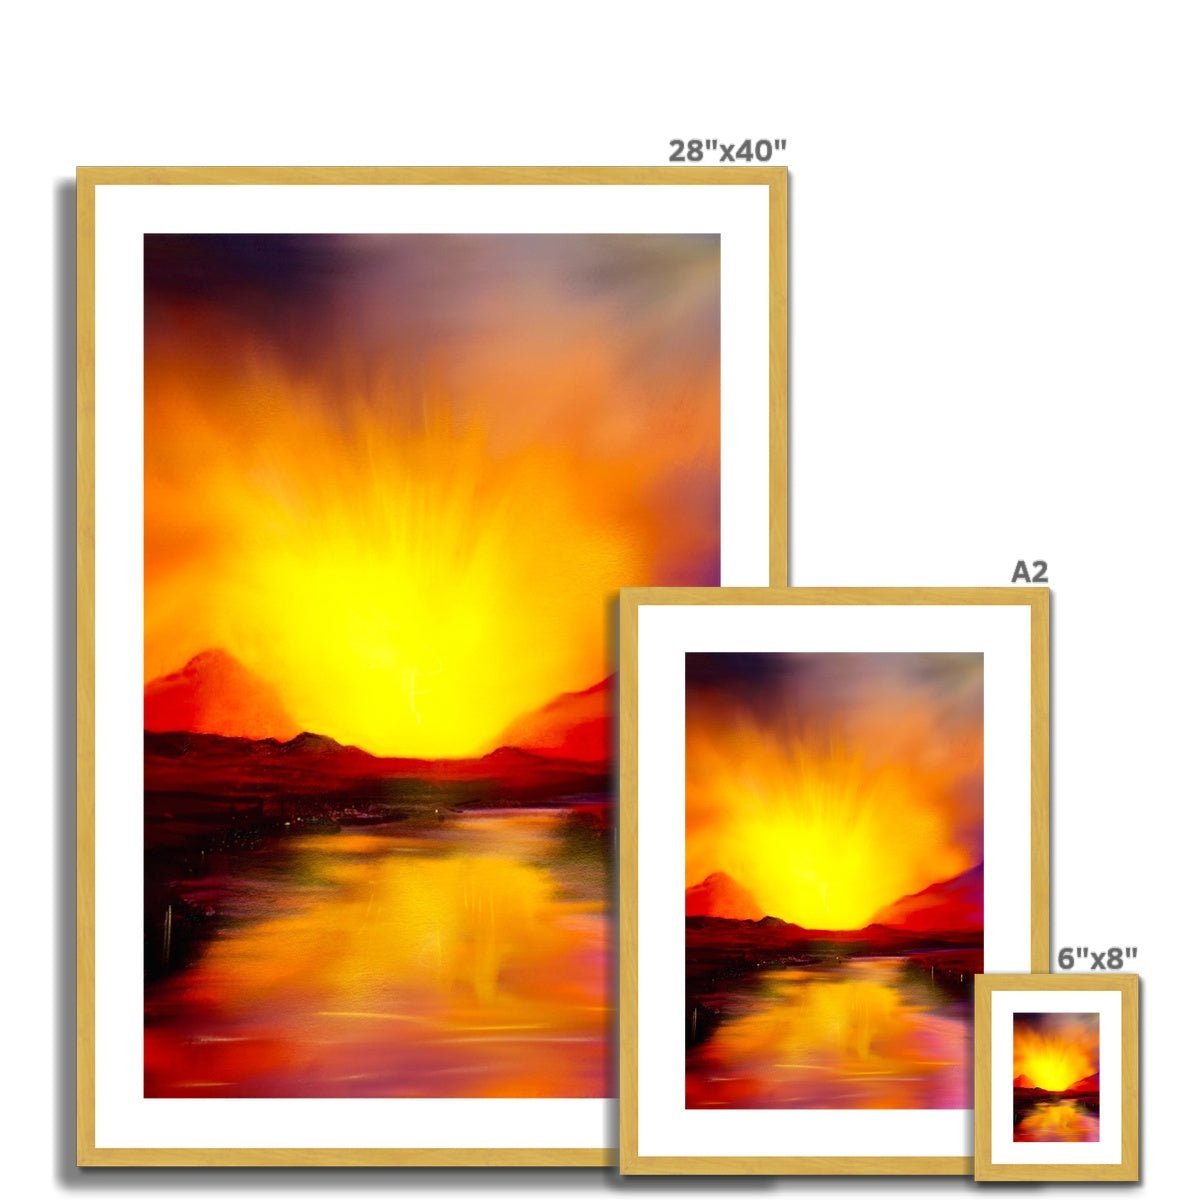 Skye Sunset Painting | Antique Framed & Mounted Prints From Scotland-Antique Framed & Mounted Prints-Skye Art Gallery-Paintings, Prints, Homeware, Art Gifts From Scotland By Scottish Artist Kevin Hunter